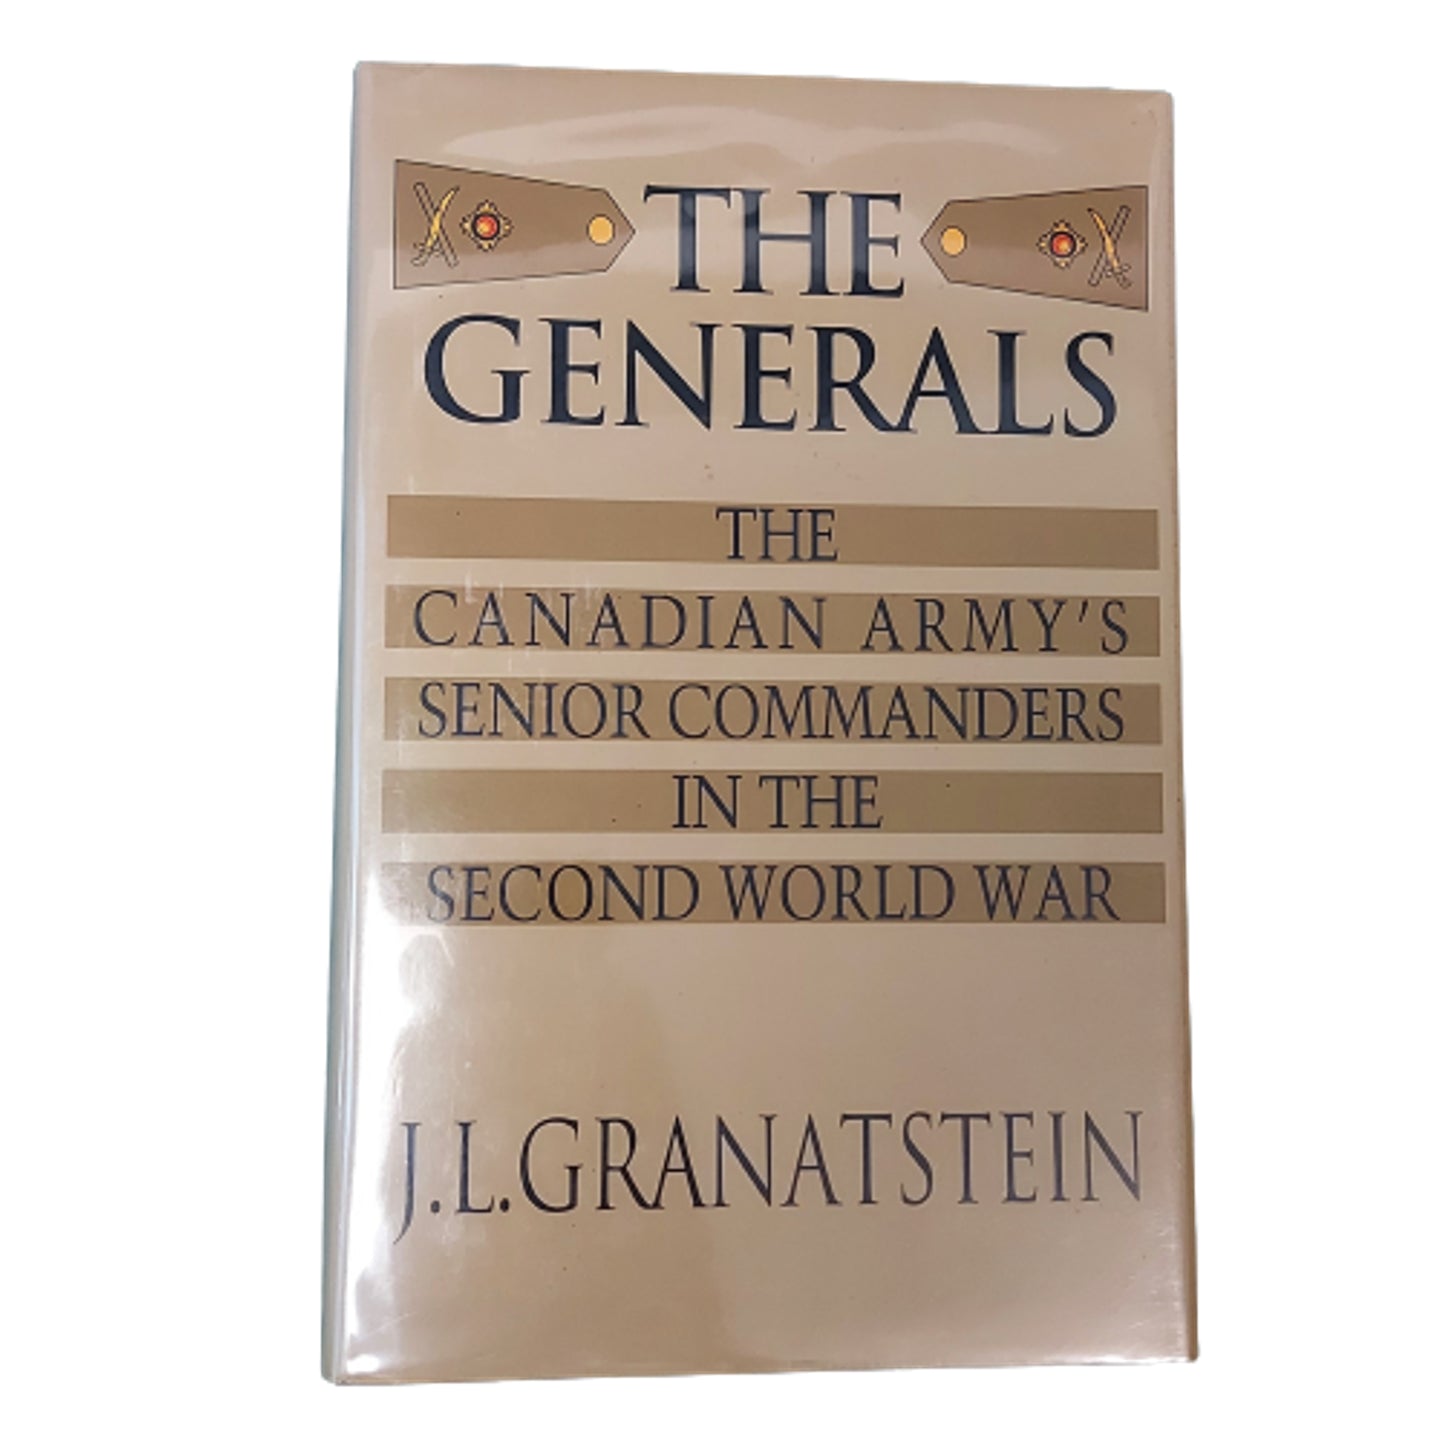 The Generals - The Canadian Army's Senior Commanders In The Second World War